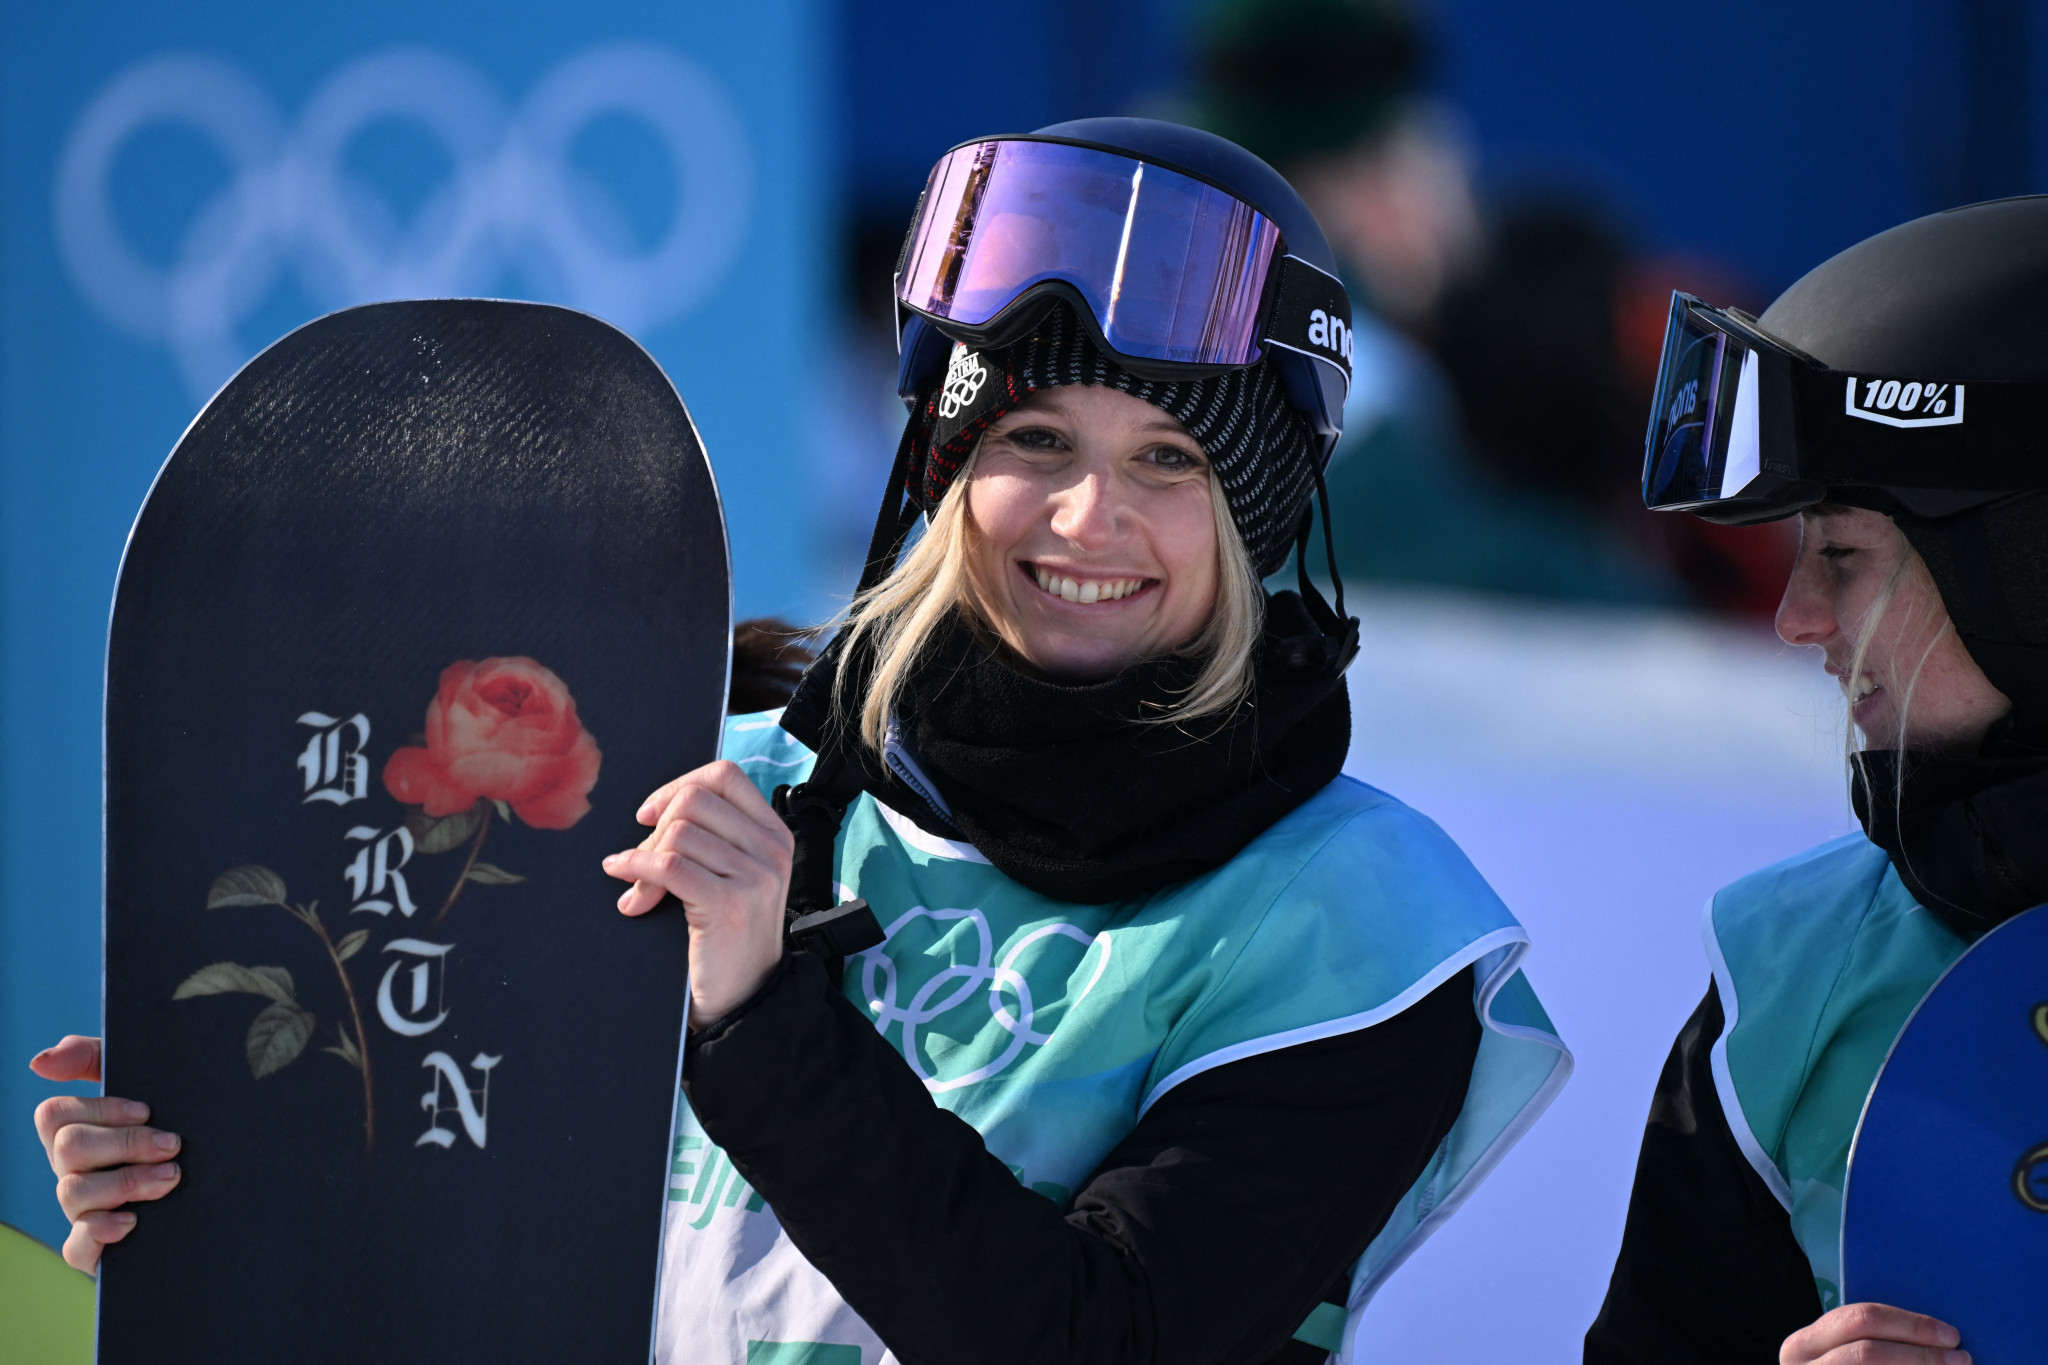 Gasser retains snowboard big air title with new trick in last run at Beijing 2022